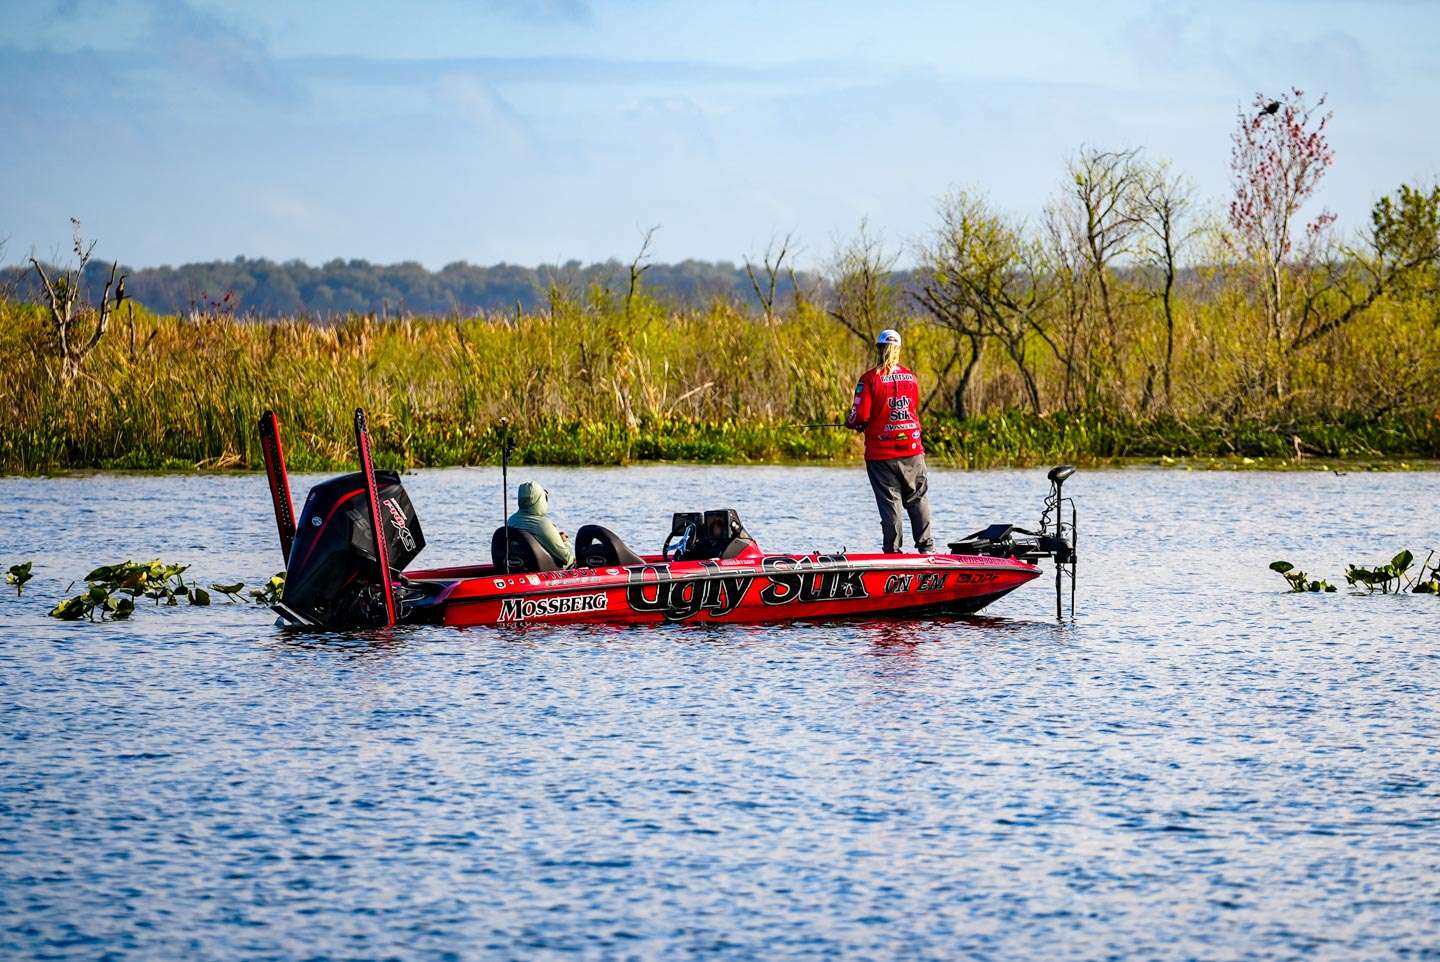 The first angler we covered was Matt Robertson, who started right around the corner from the mouth of the canal. 